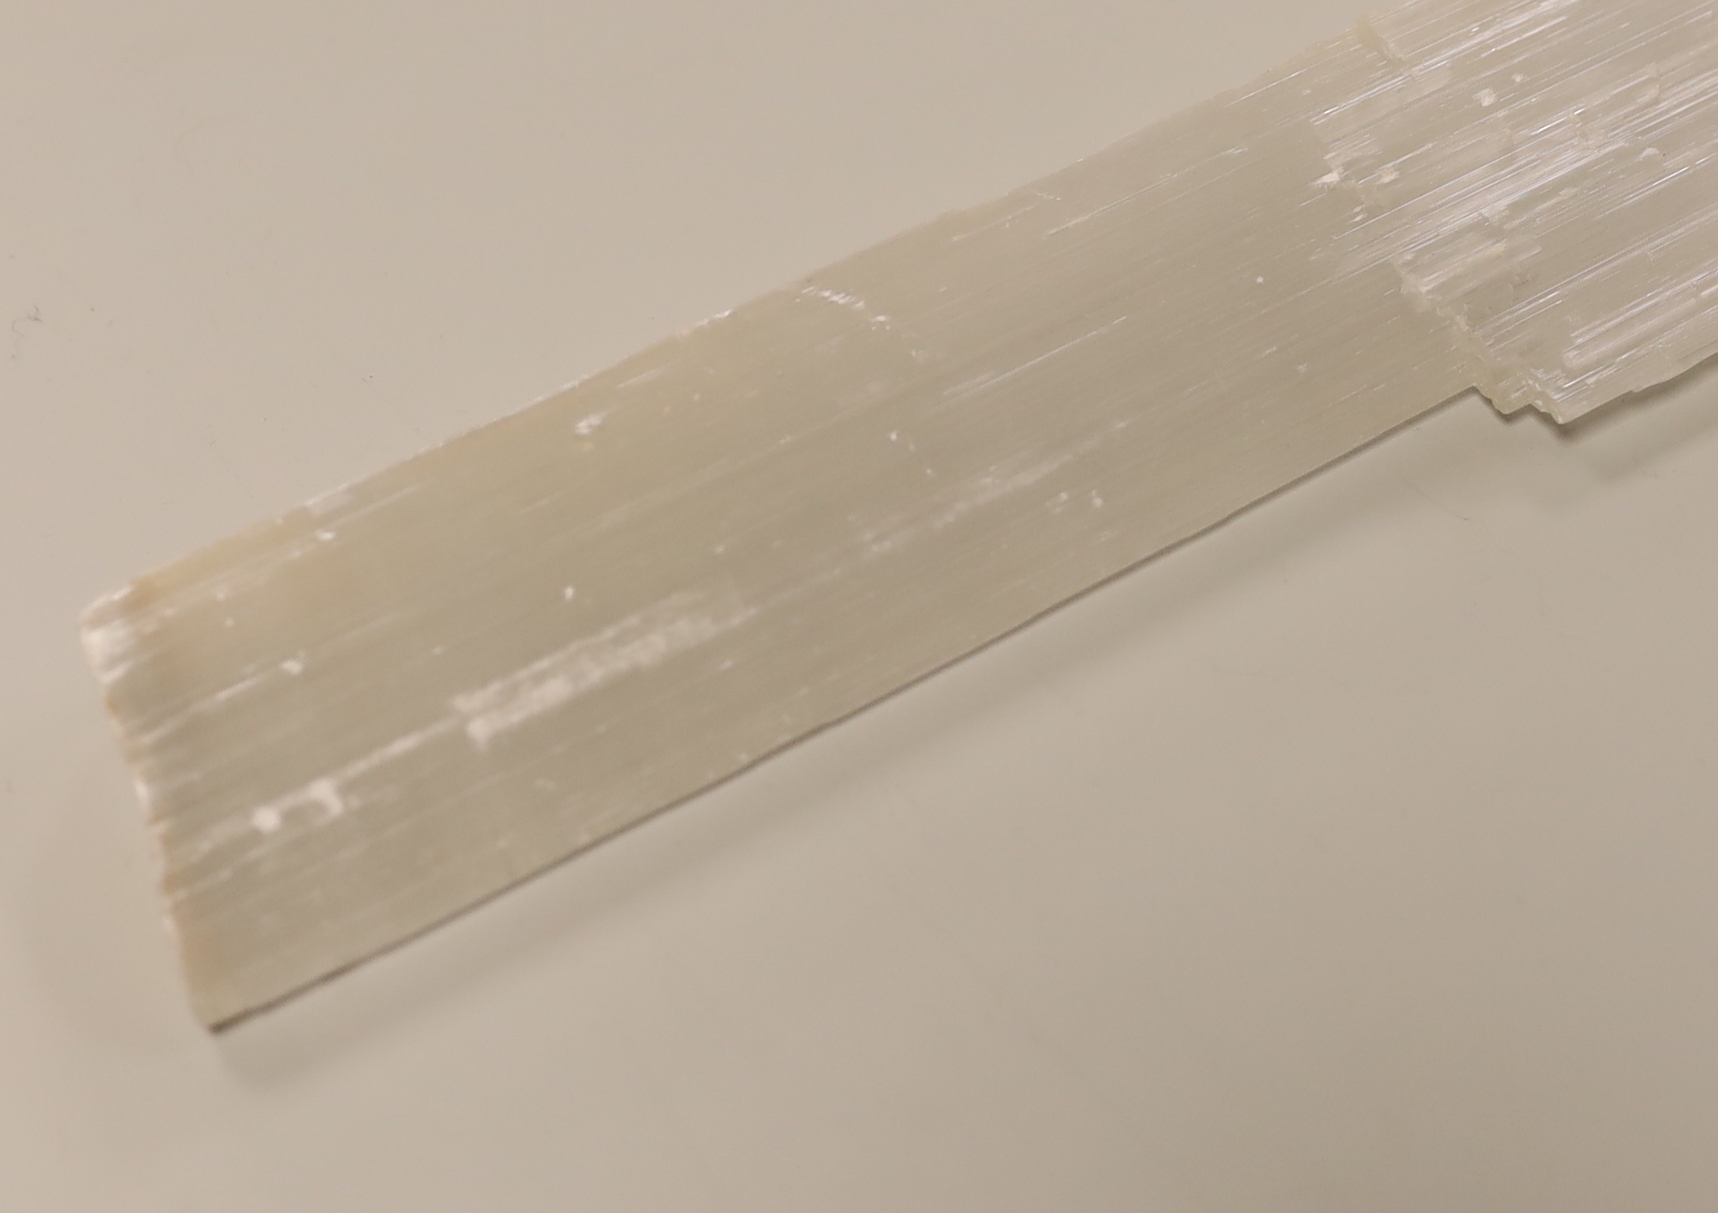 A jagged section of selenite 46cm